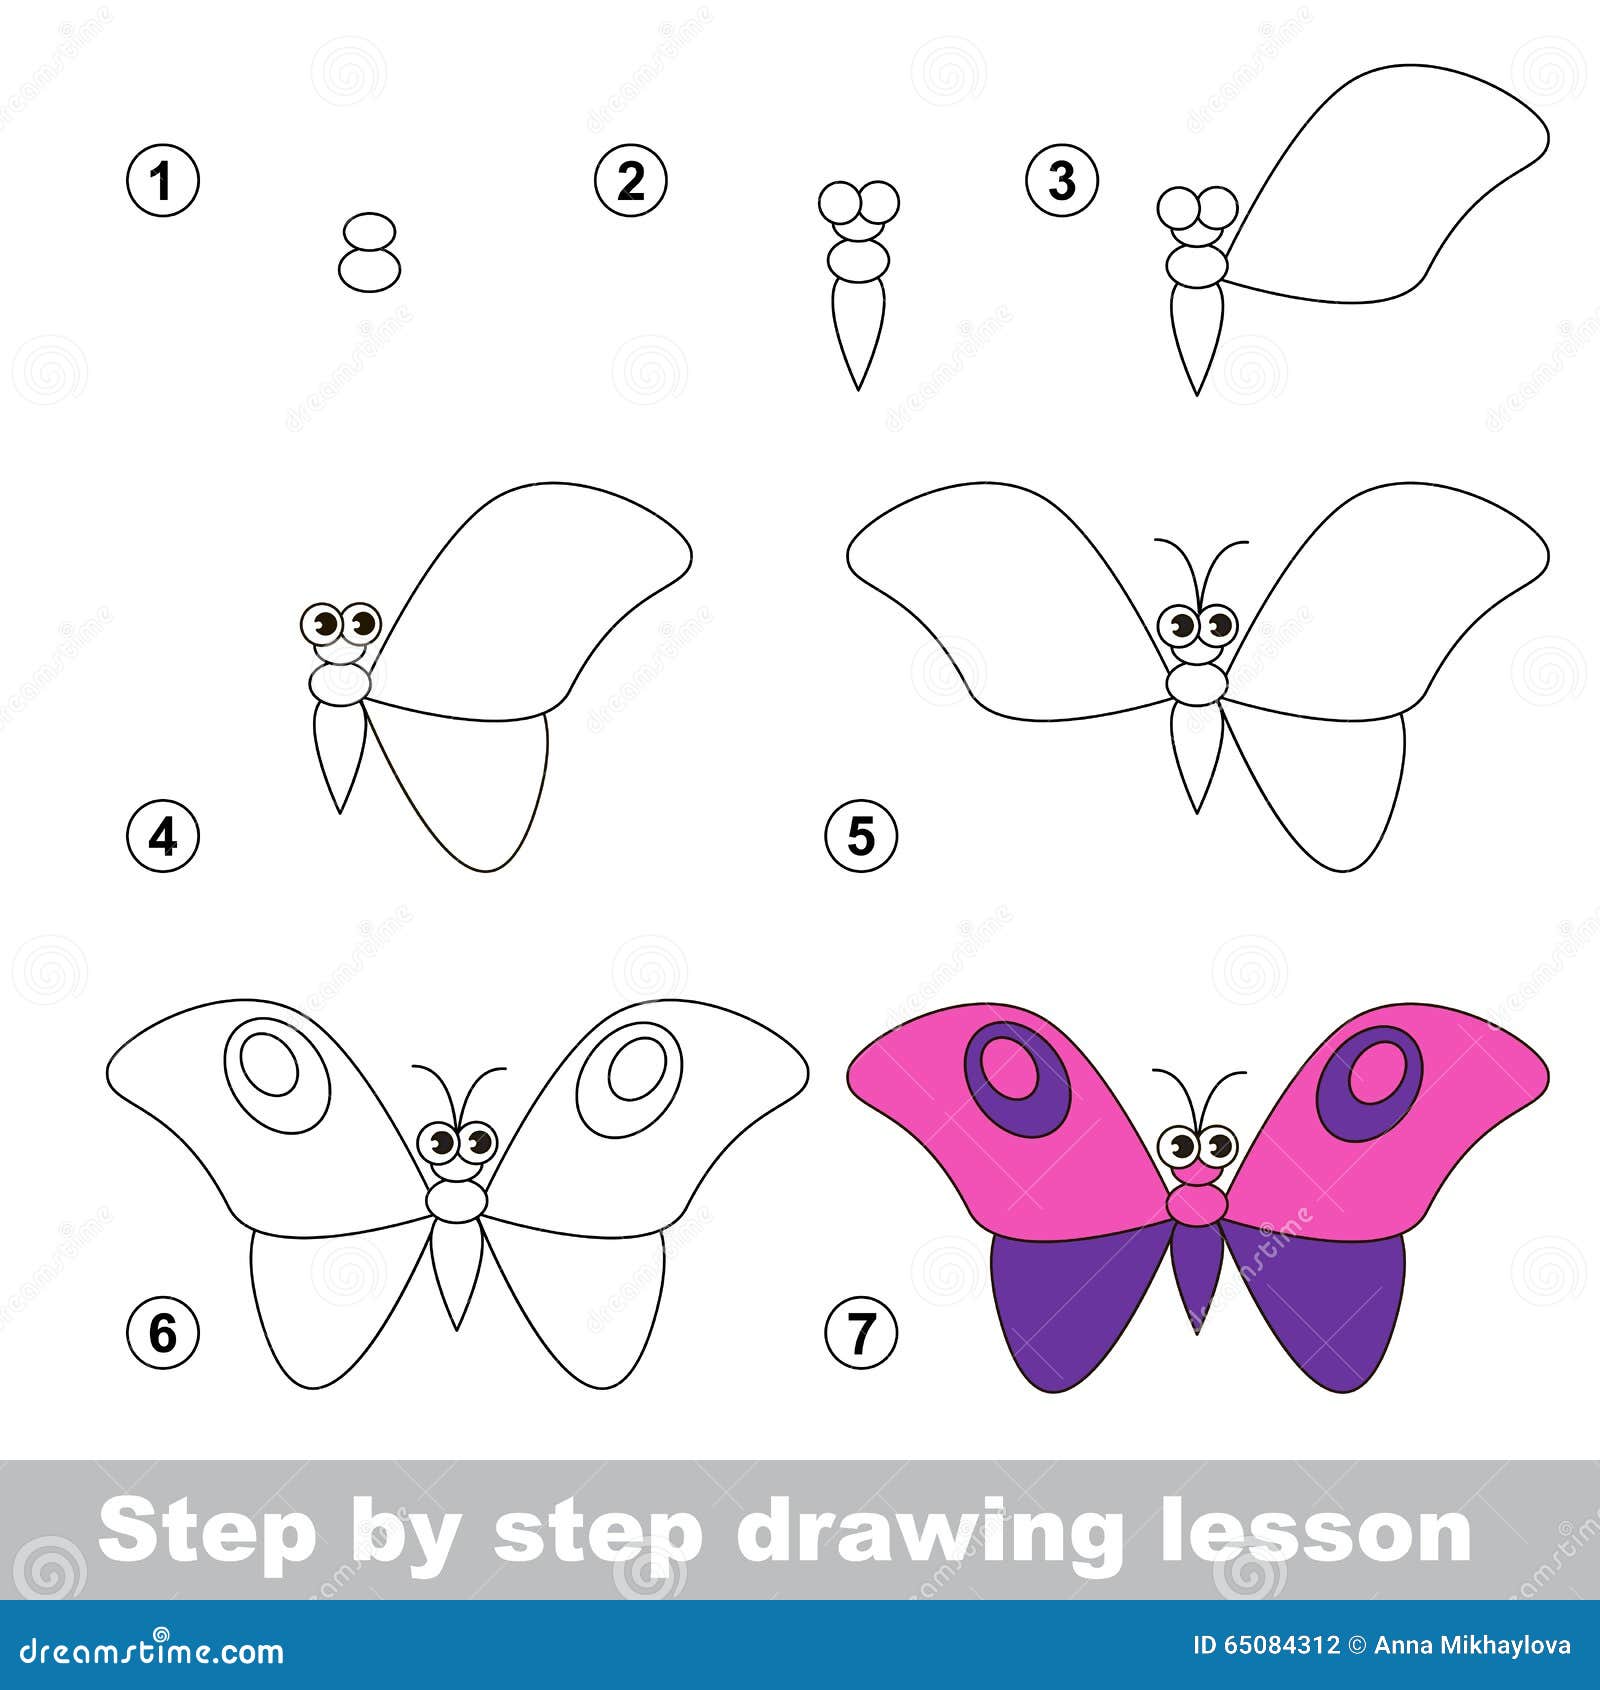 Drawing Tutorial How To Draw A Butterfly Illustration 65084312 Megapixl You just need a red pen and a paper to start drawing a 10 steps to draw a butterfly. megapixl com